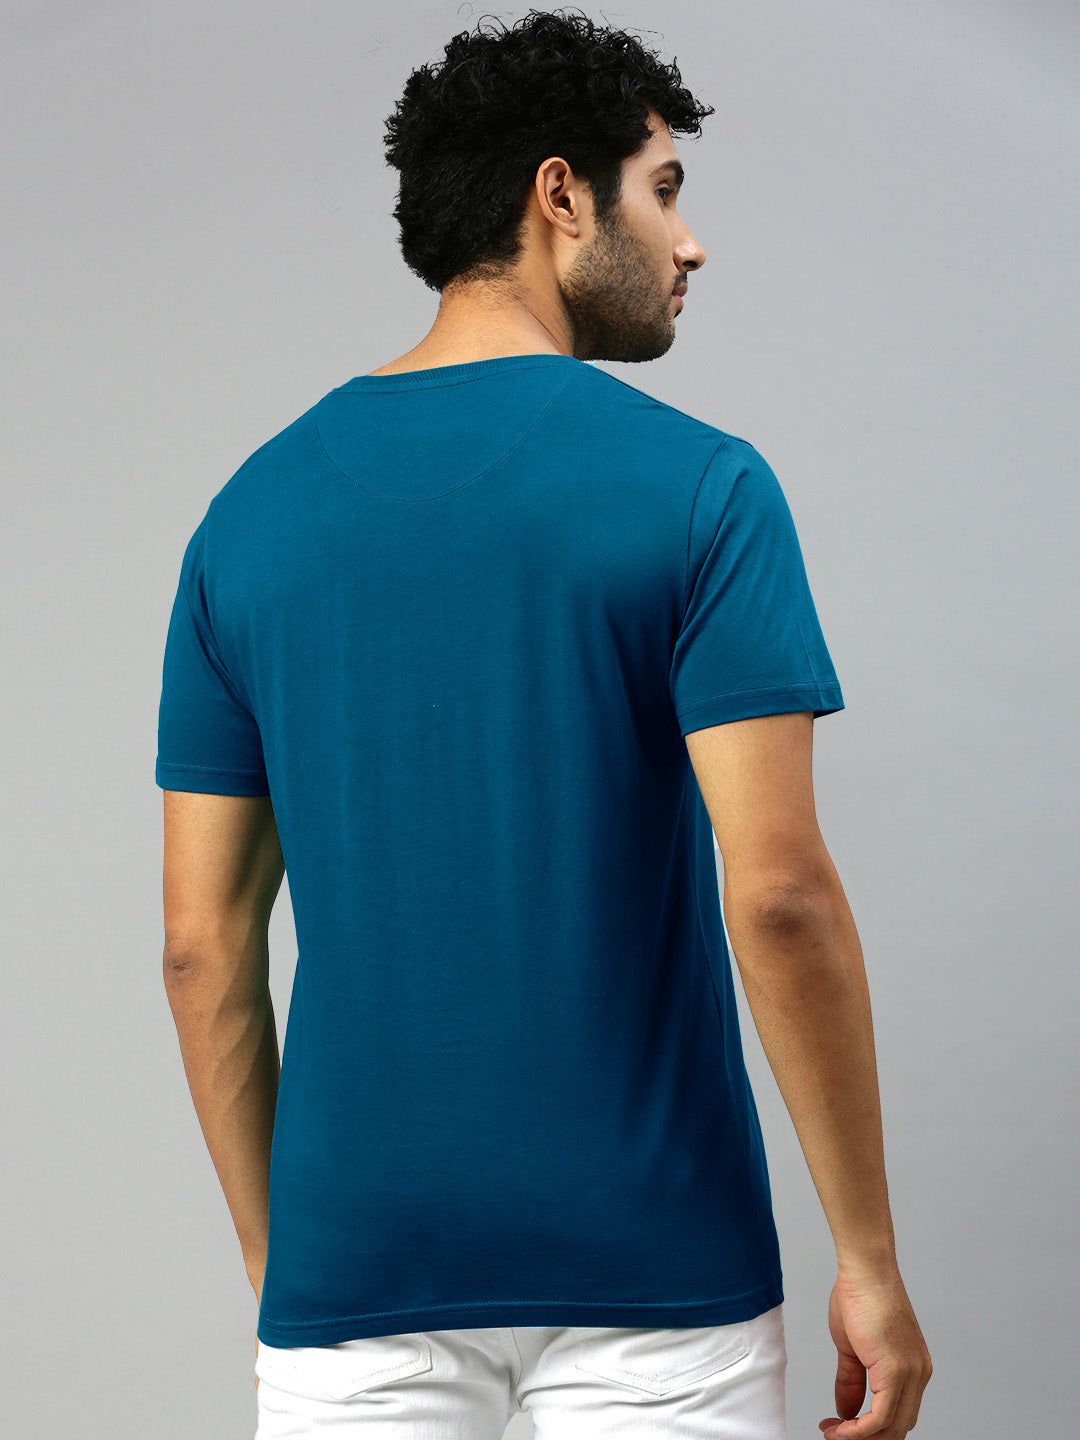 Blue Graphic Printed Round Neck Casual T-Shirt GT42 -Back view